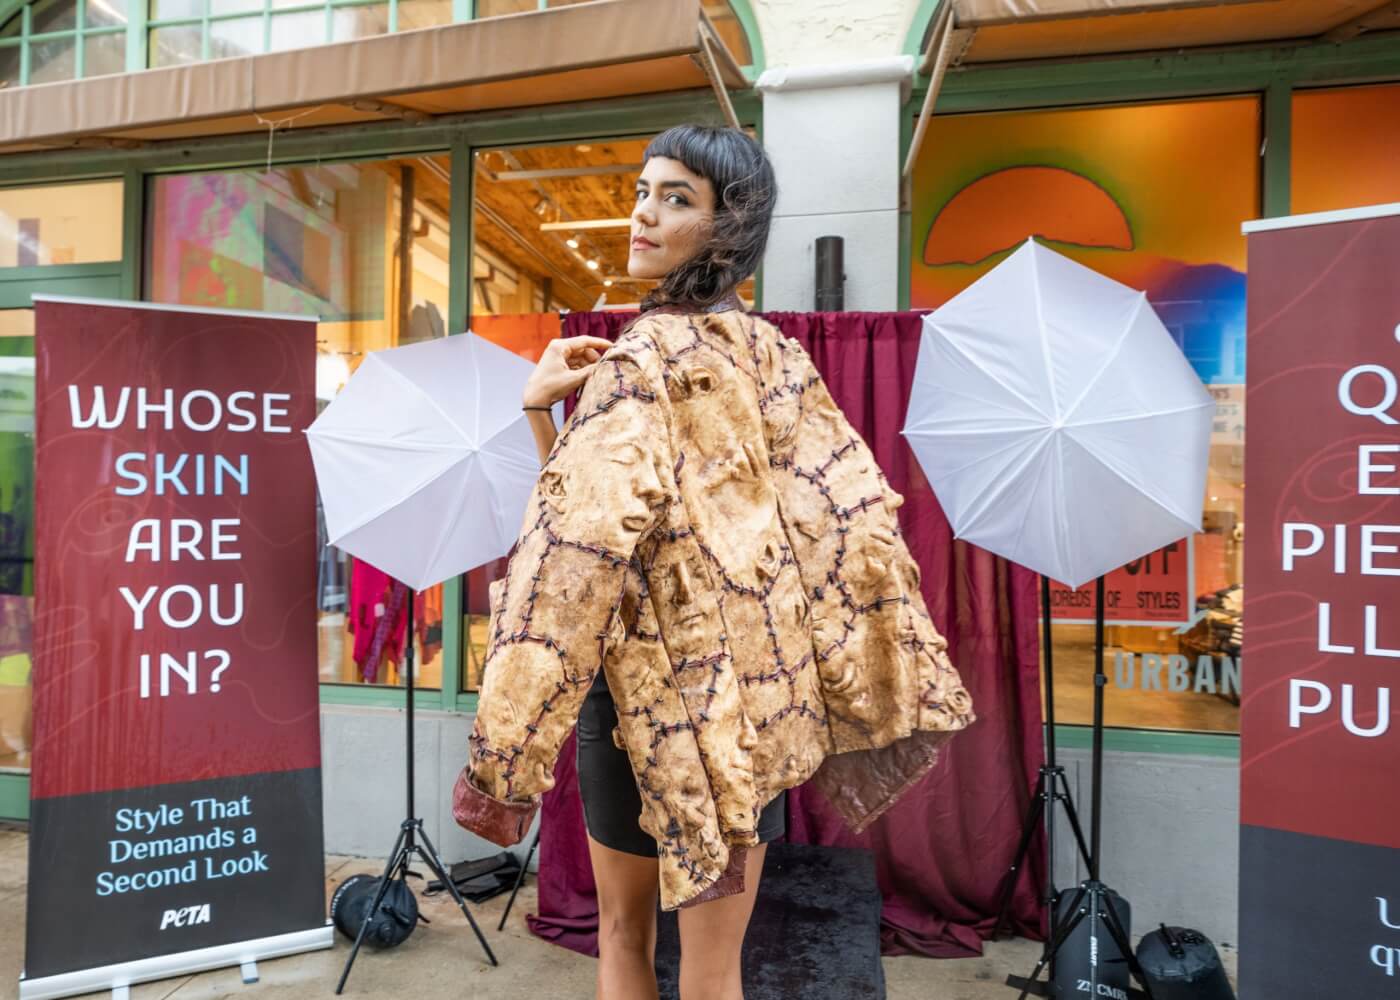 a person poses with a jacket made to look like it's made of human faces. signs in the background read "whose skin are you in?"